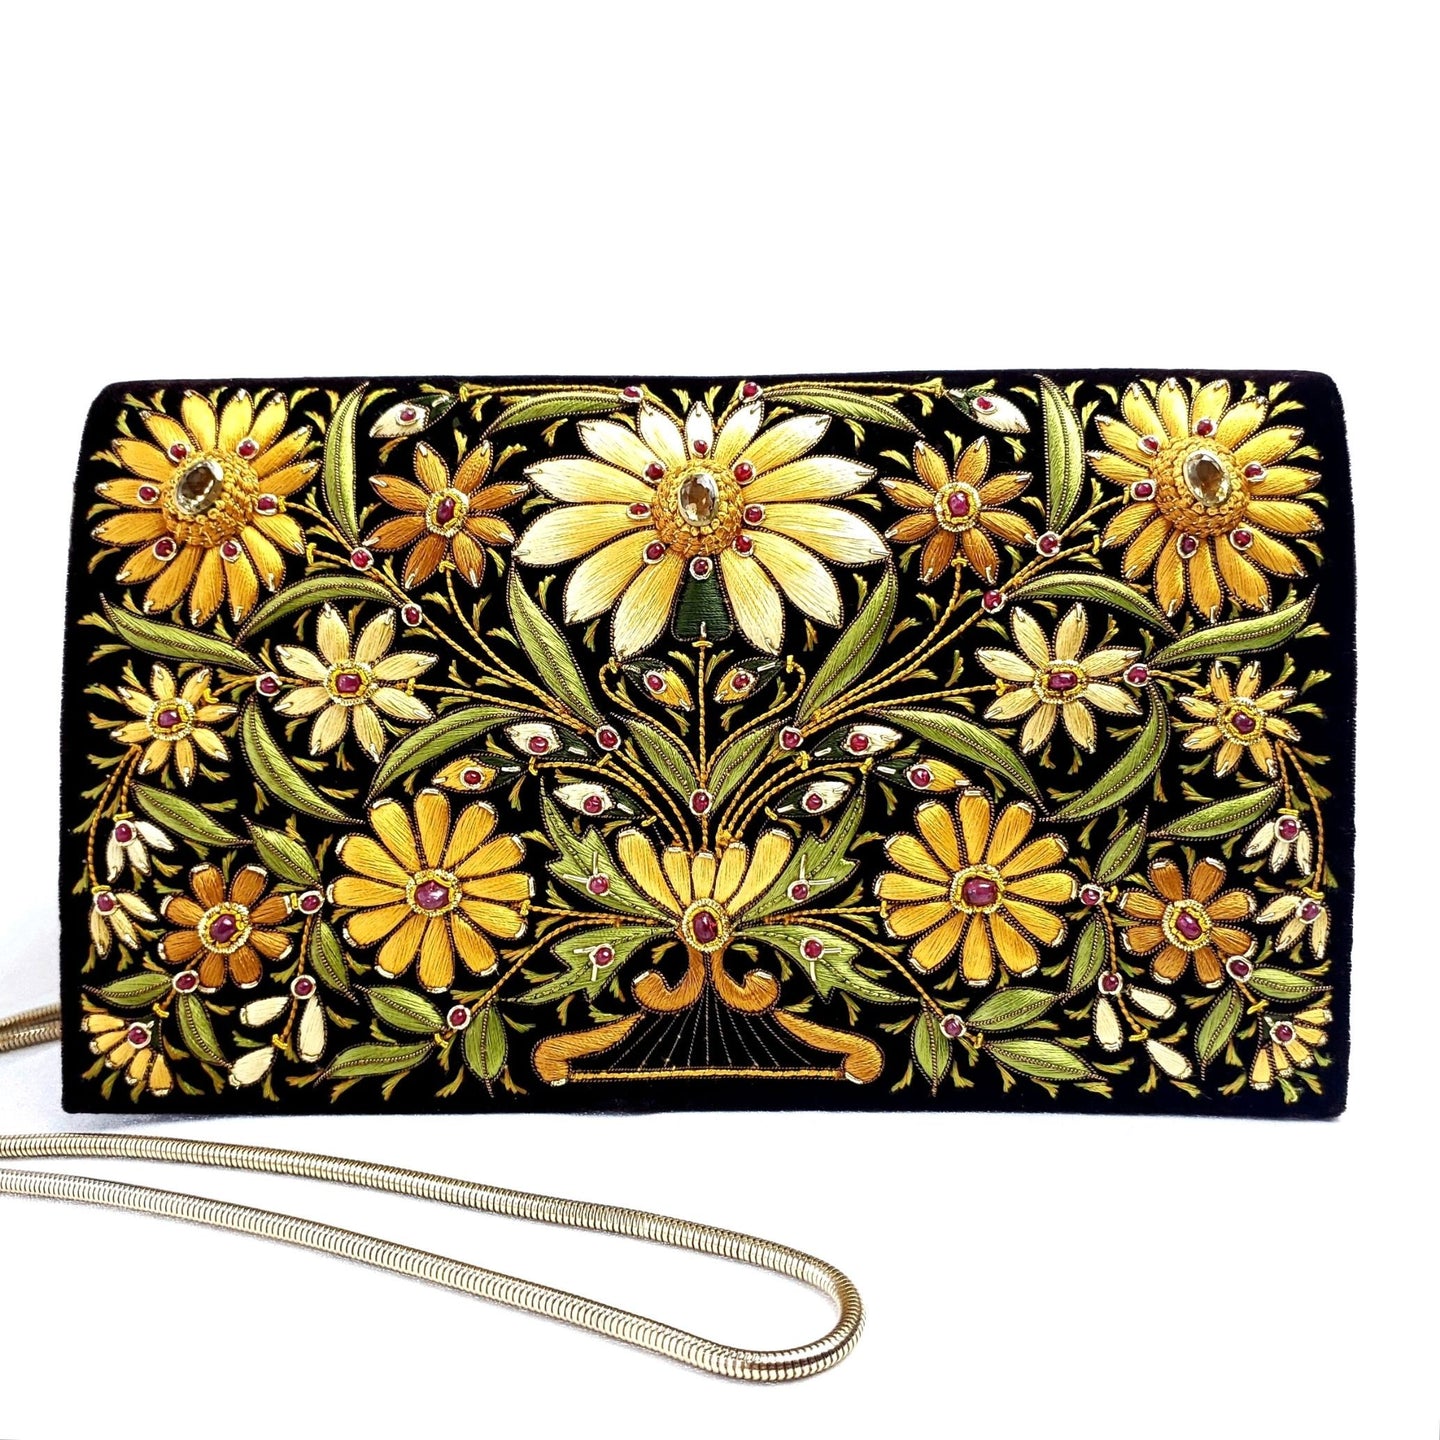 Embroidered brown velvet handbag with yellow flowers and citrine and ruby gemstones BoutiqueByMaryam.